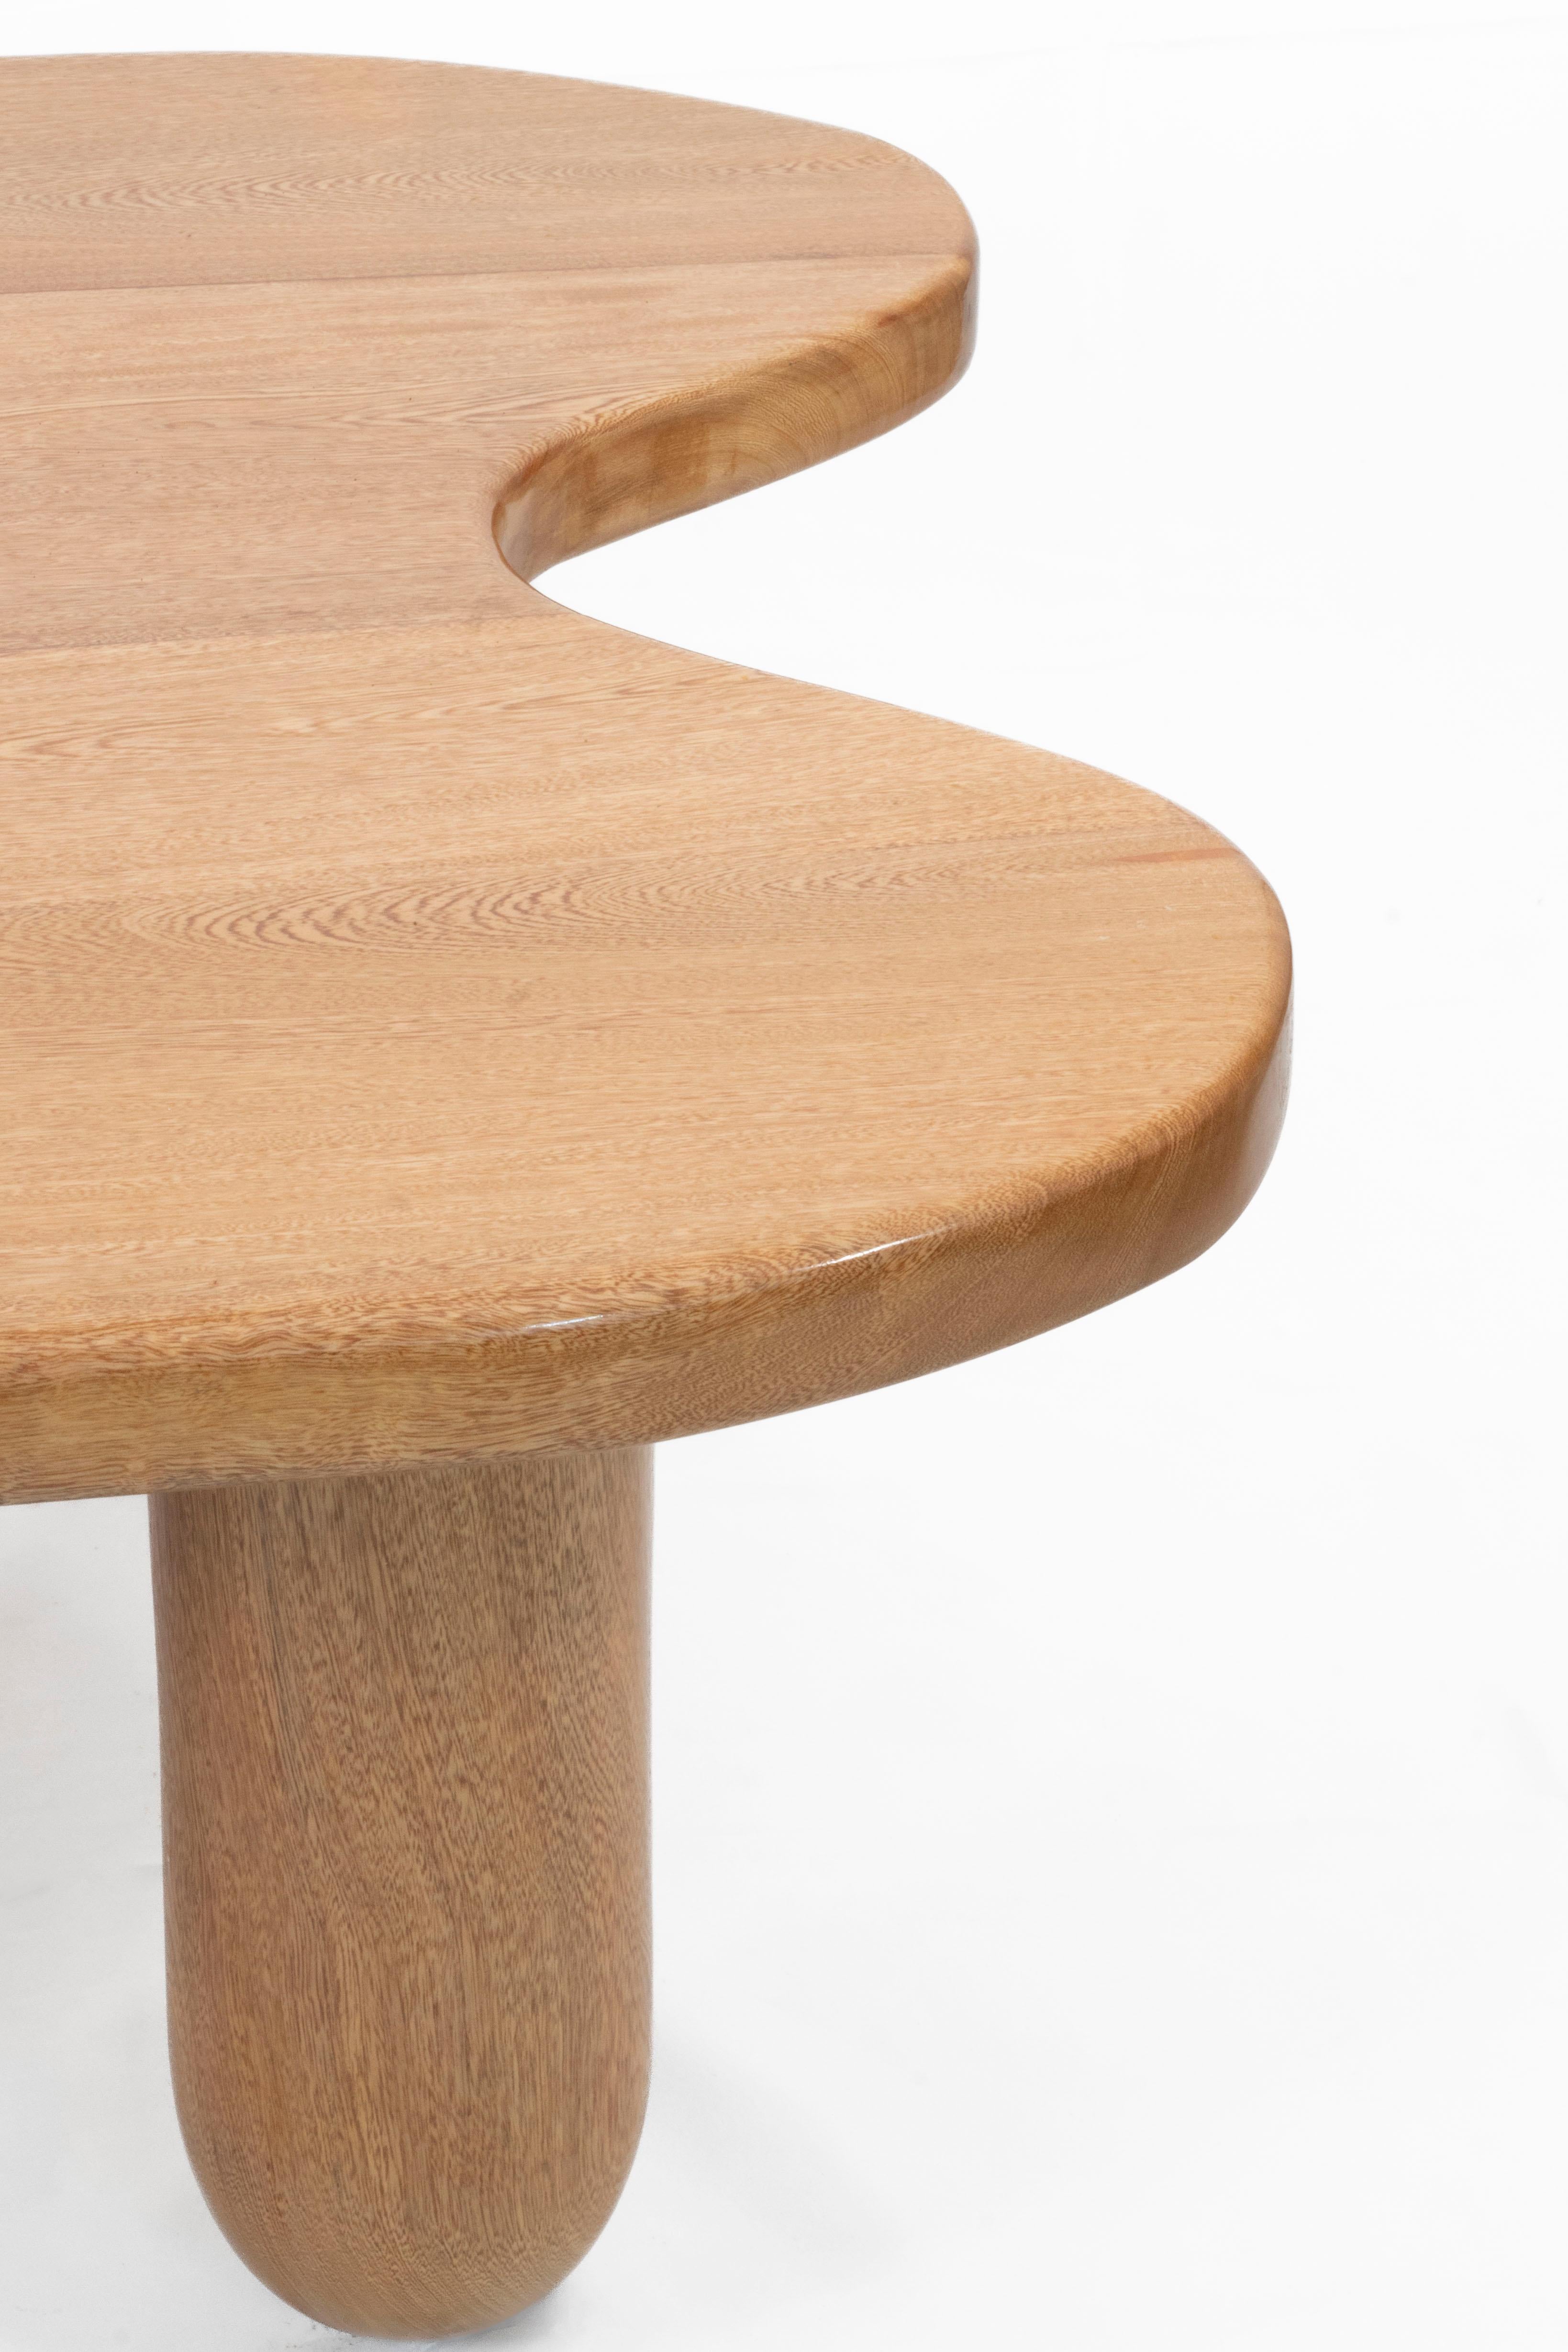 Turned Lago Table in solid Mexican Oak; organic shapes; a contemporary coffee table. For Sale